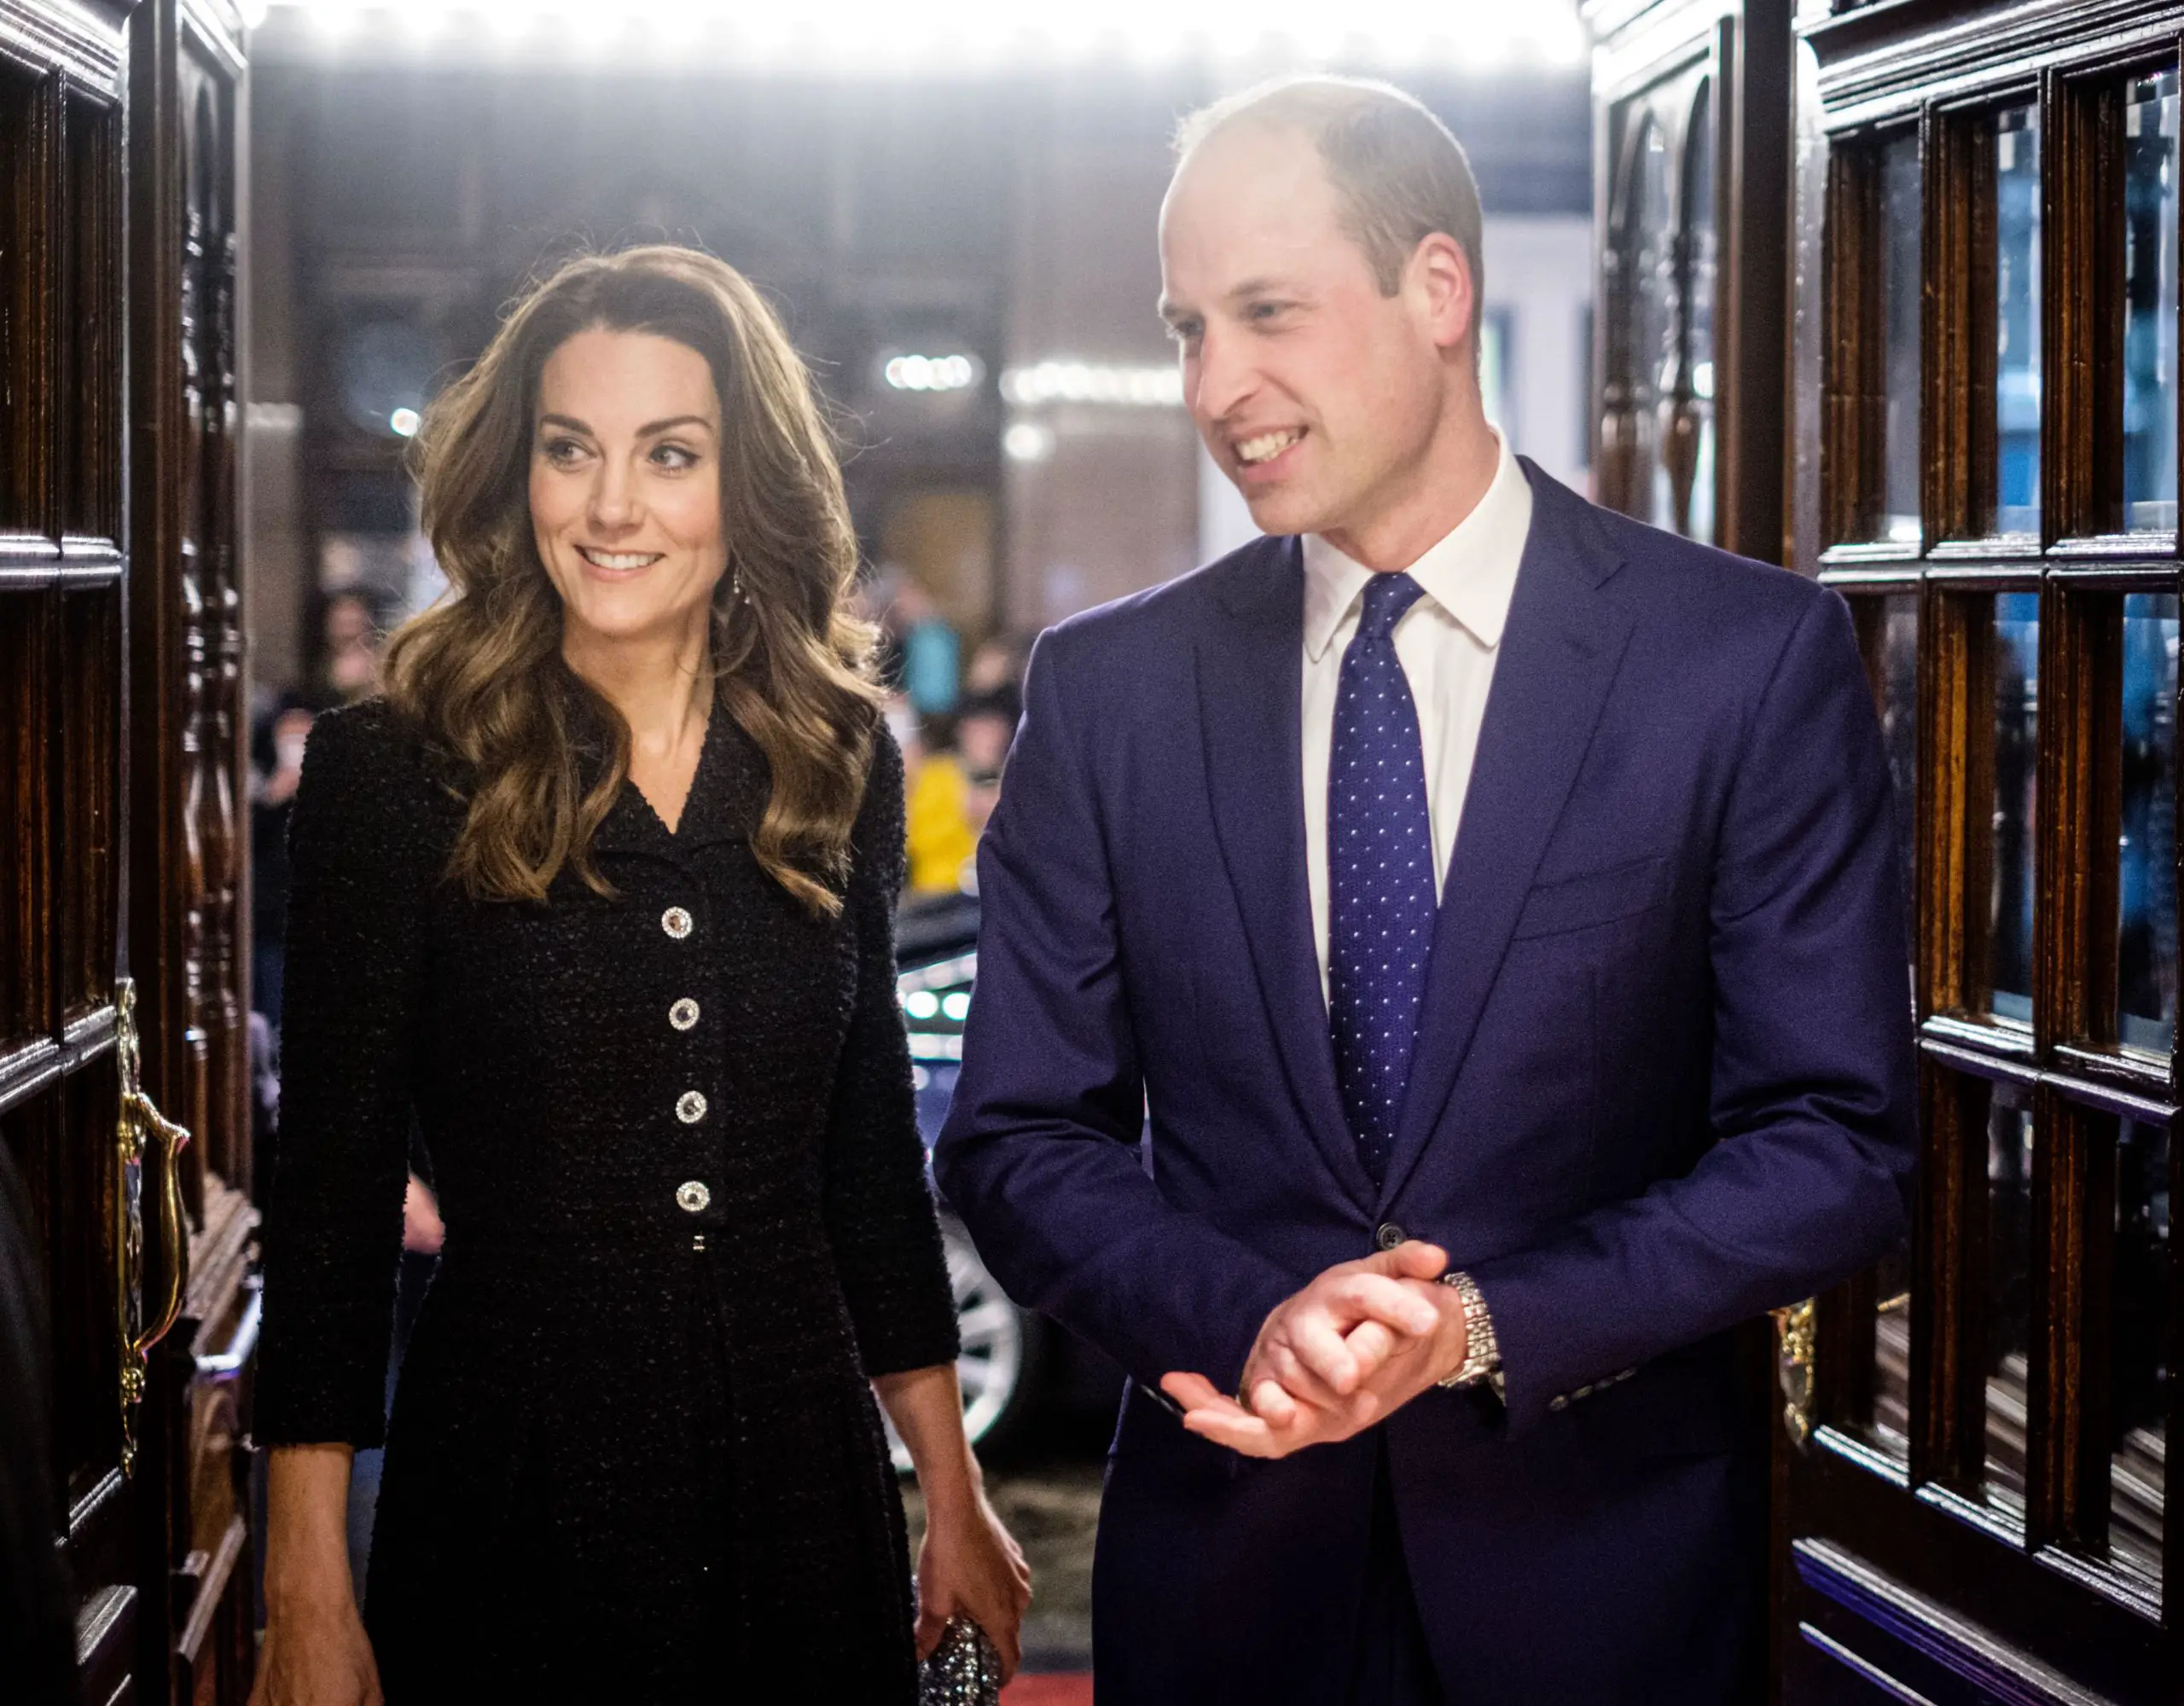 Duke and Duchess of Cambridge attended Dear Evan Hansen performance Duke and Duchess of Cambridge attended Dear Evan Hansen performance in London